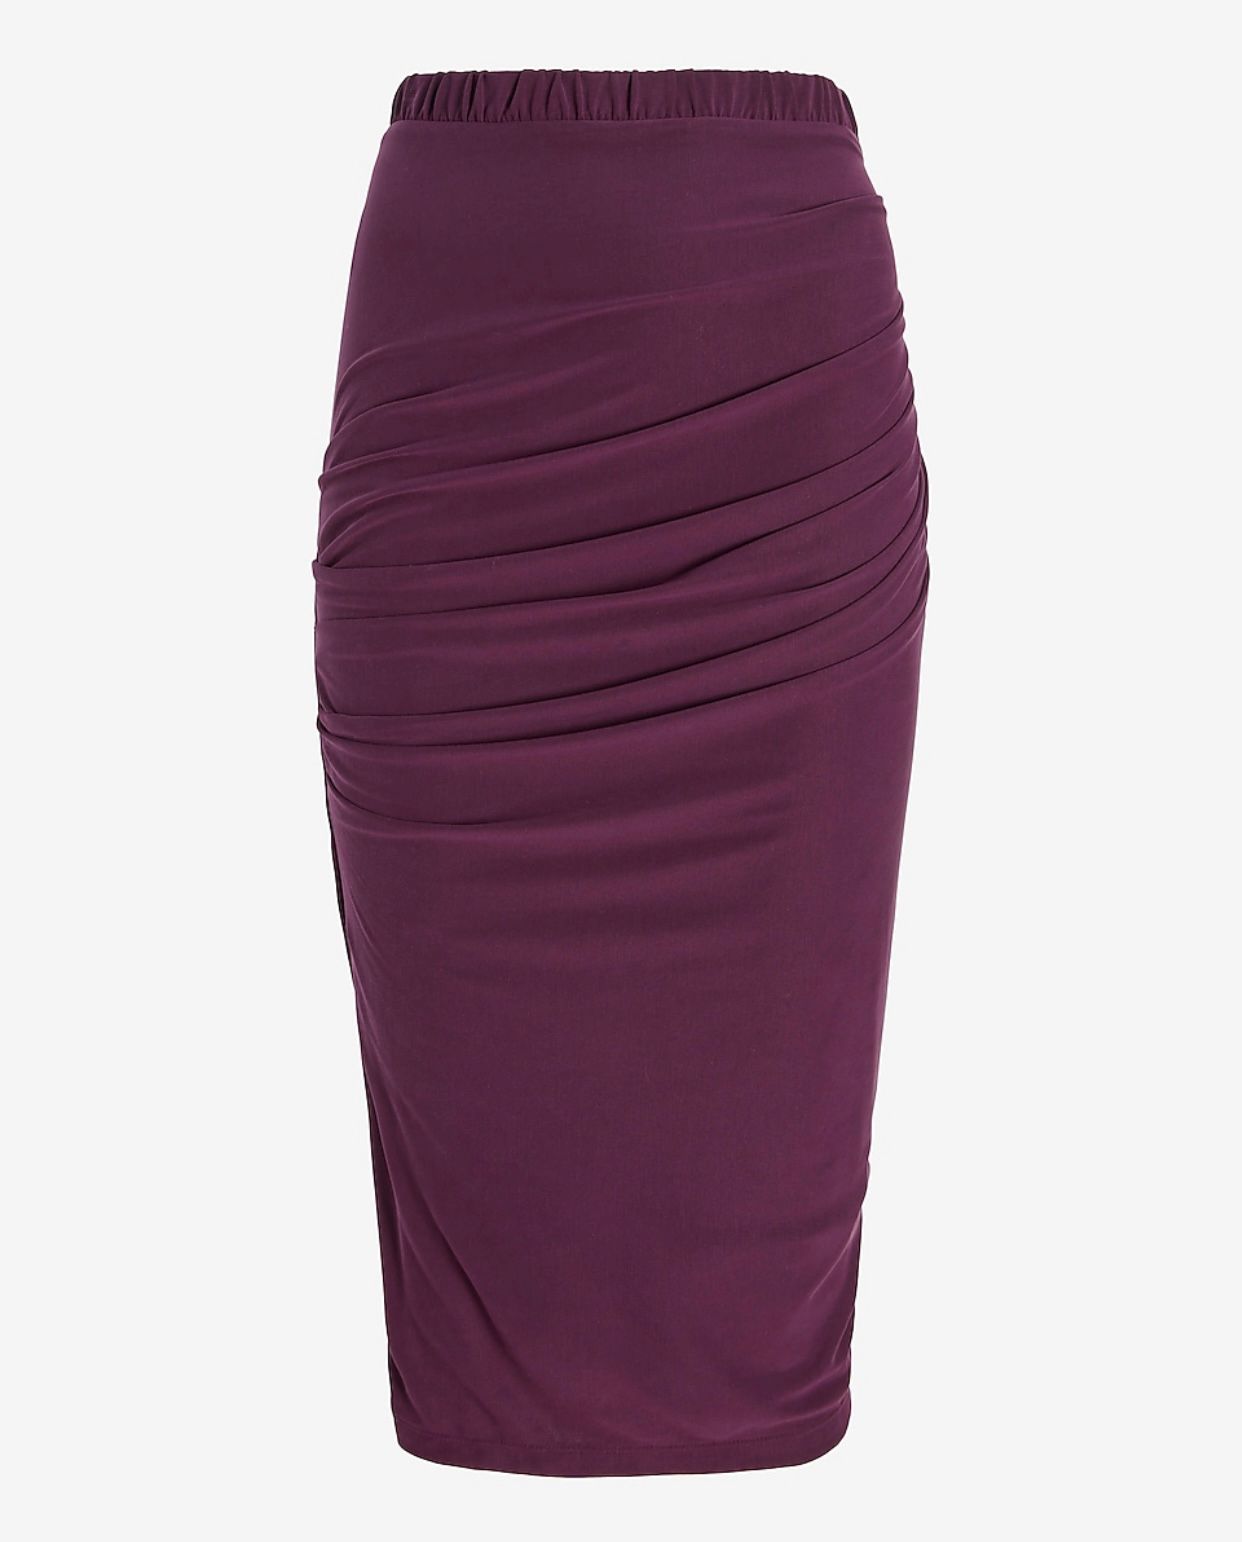 Buy FABALLEY Purple Womens Lace Pencil Skirt | Shoppers Stop